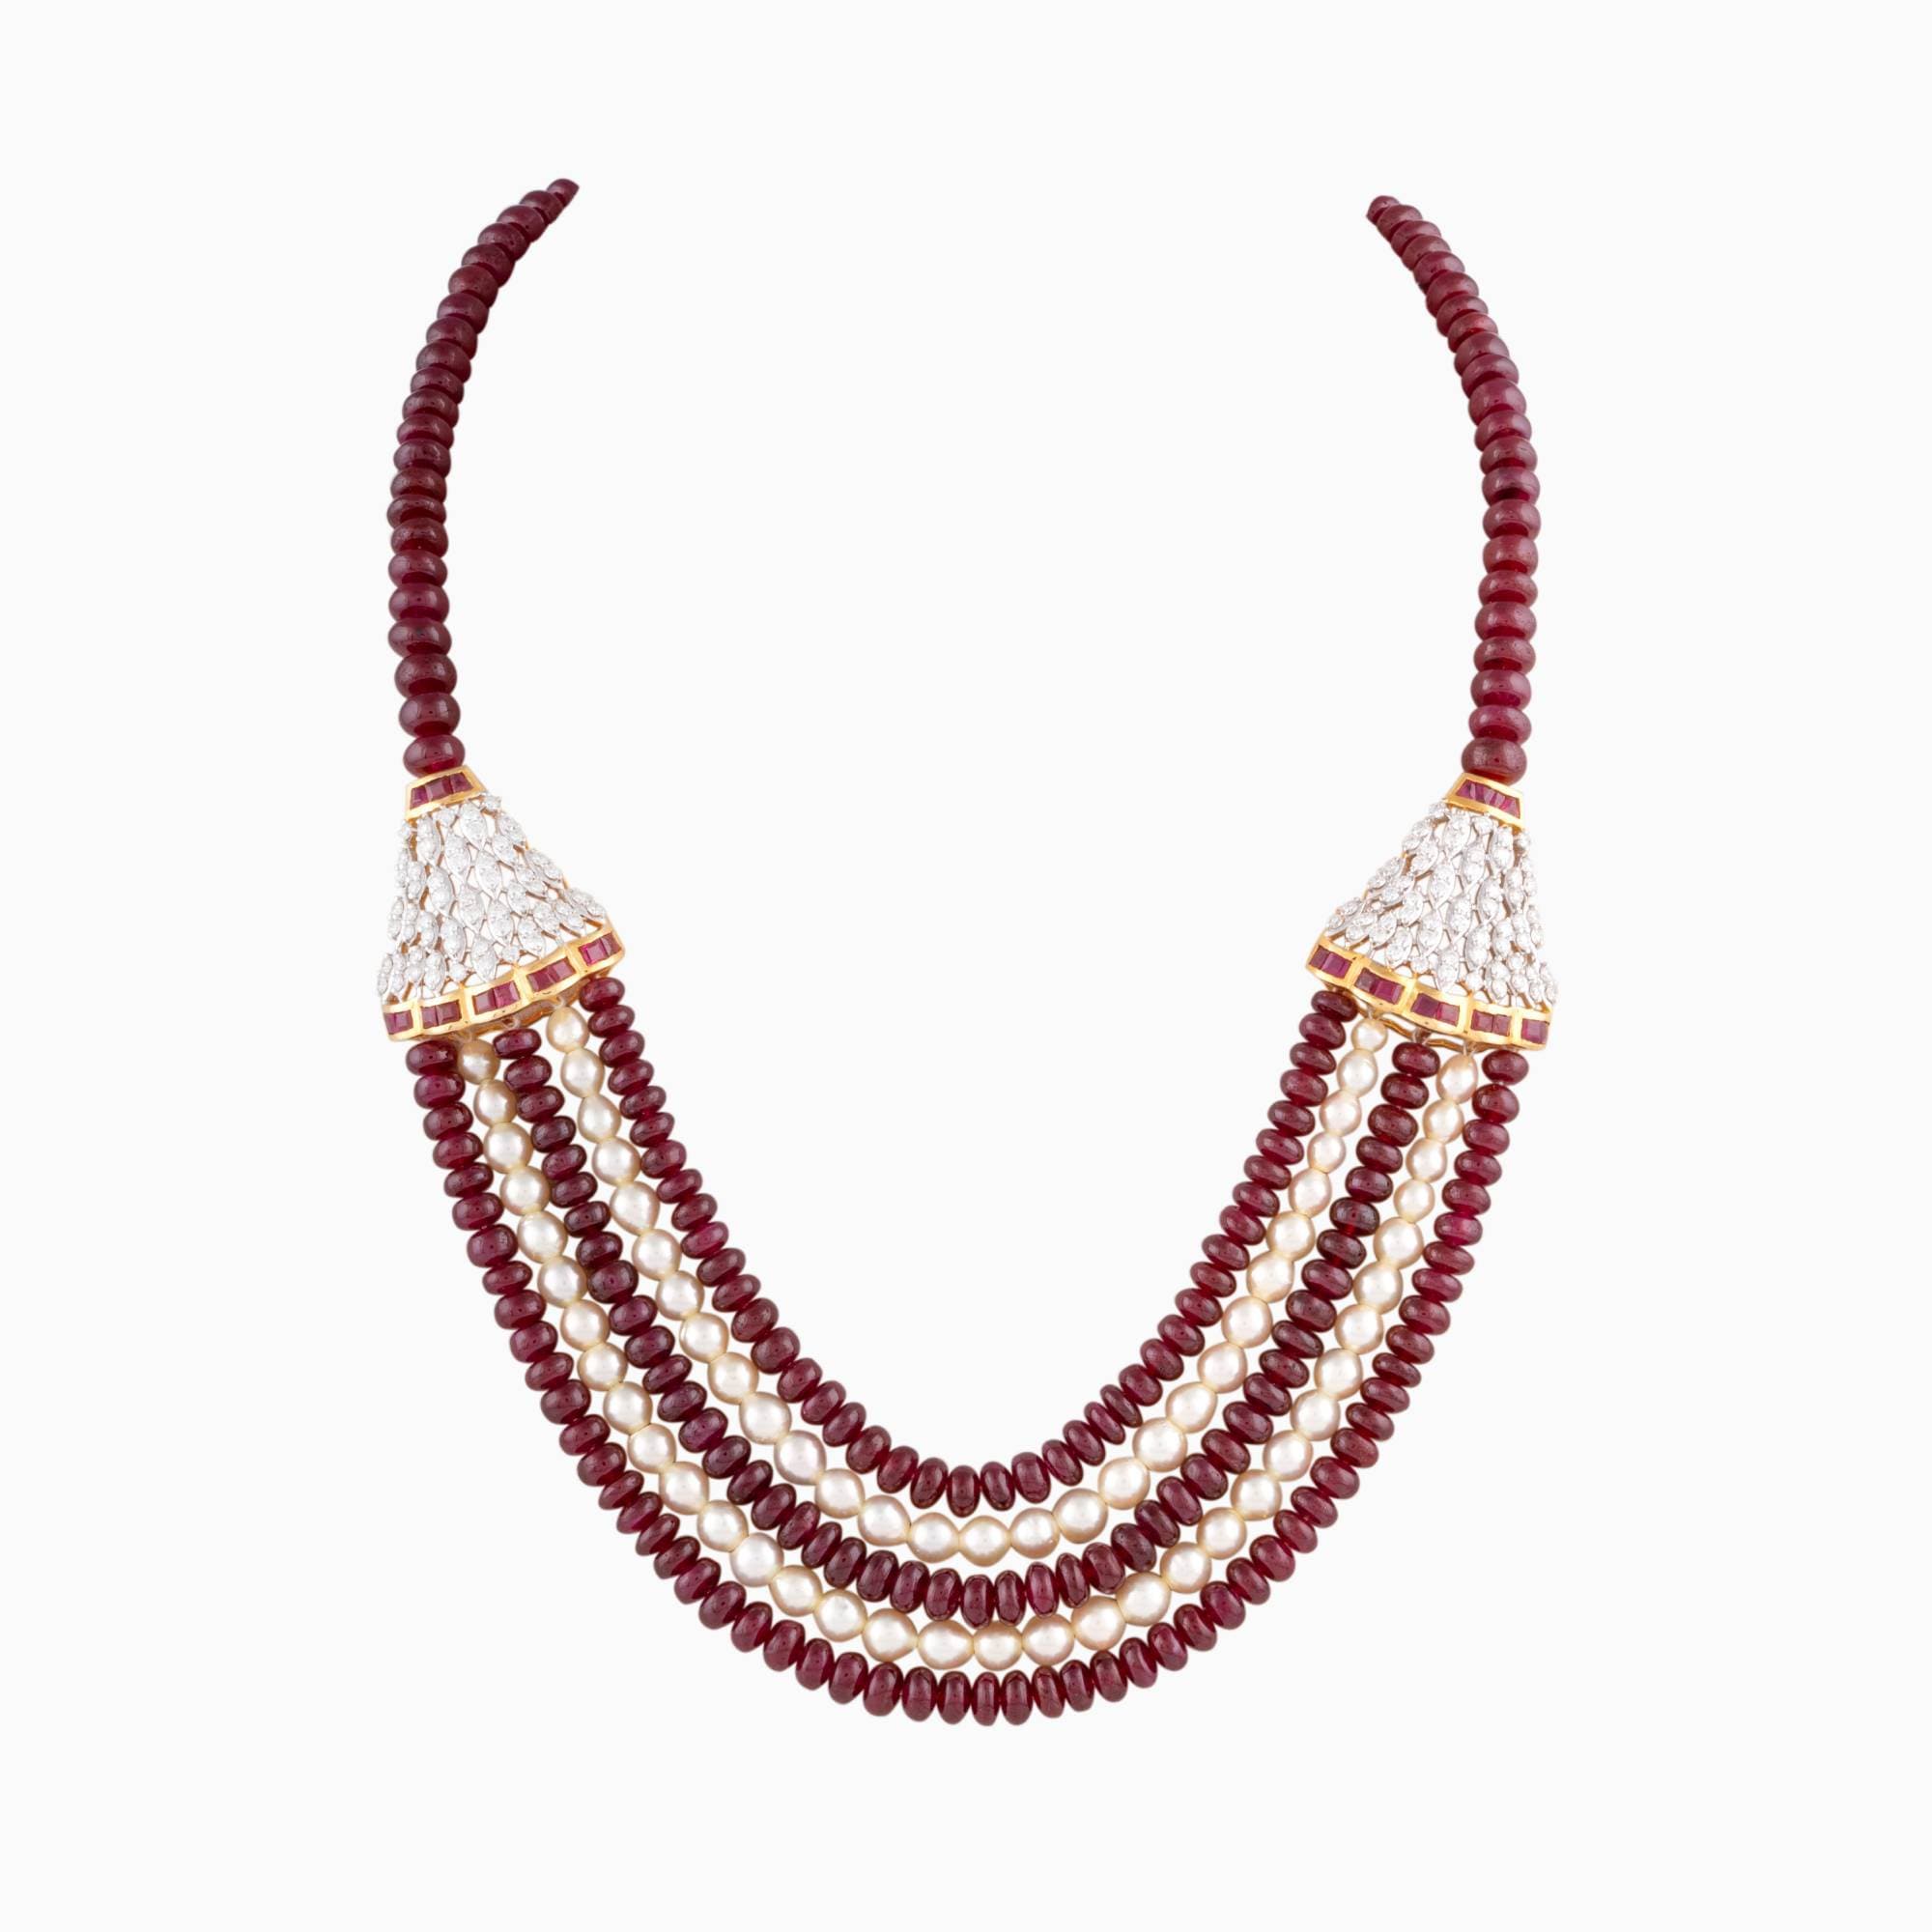 Necklace with Round Cut Diamond, Ruby,  Pearls and Ruby Beads - GDNE0419